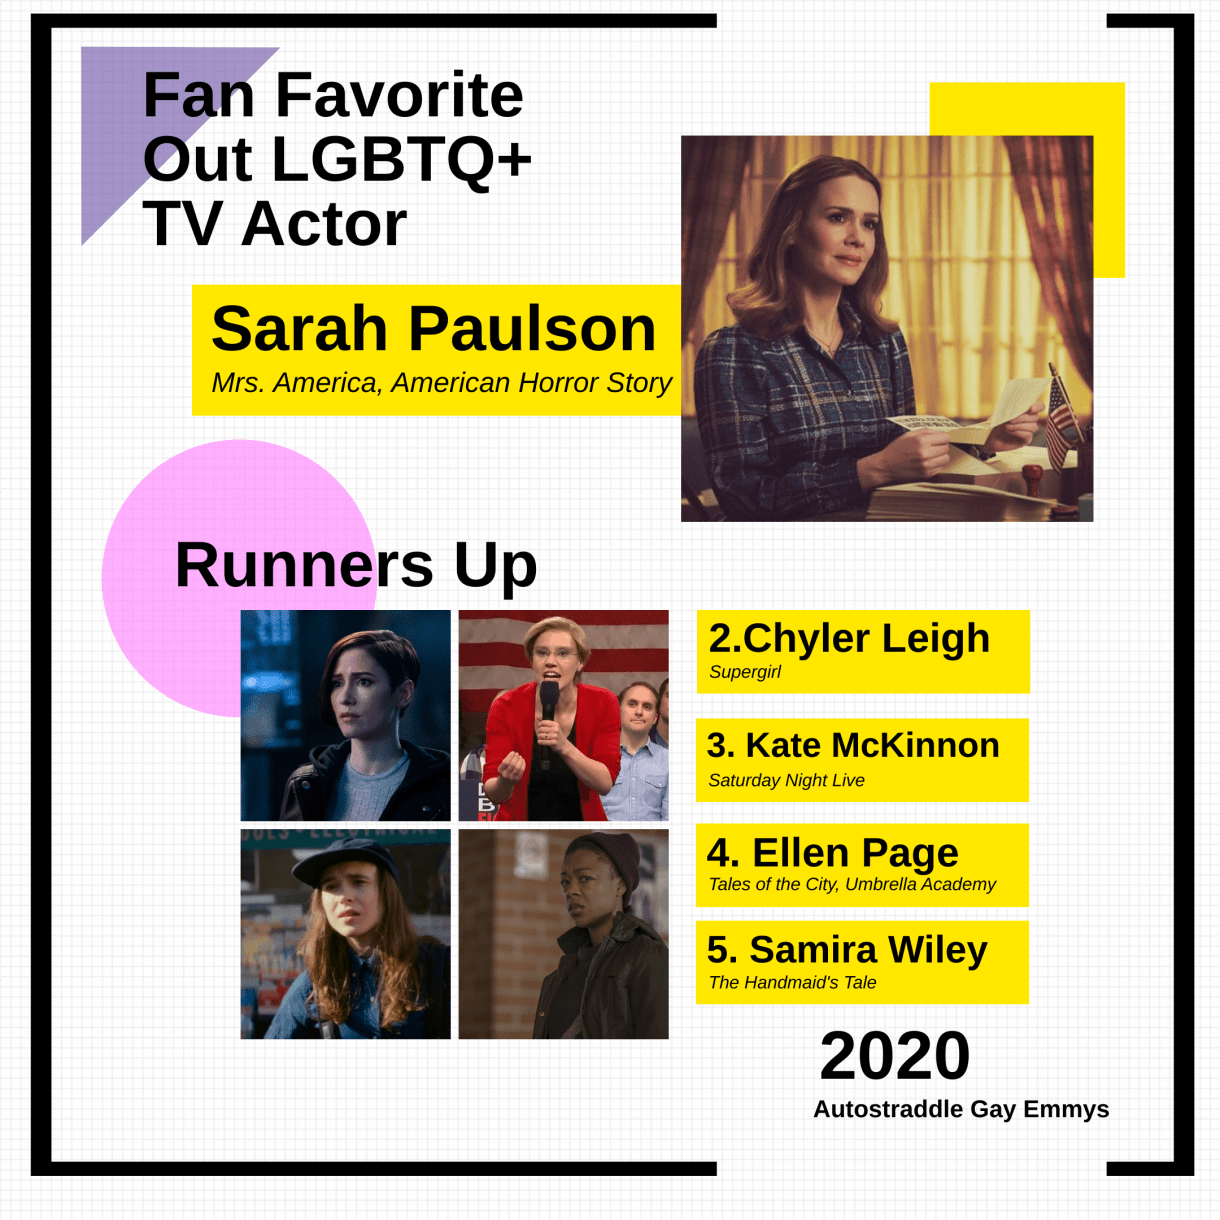 Graphic for Fan Favorite Out LGBTQ+ Actor: 1. Sarah Paulson, 2. Chyler Leigh, 3. Kate McKinnon, 4. Ellen Page, 5. Samira Wiley